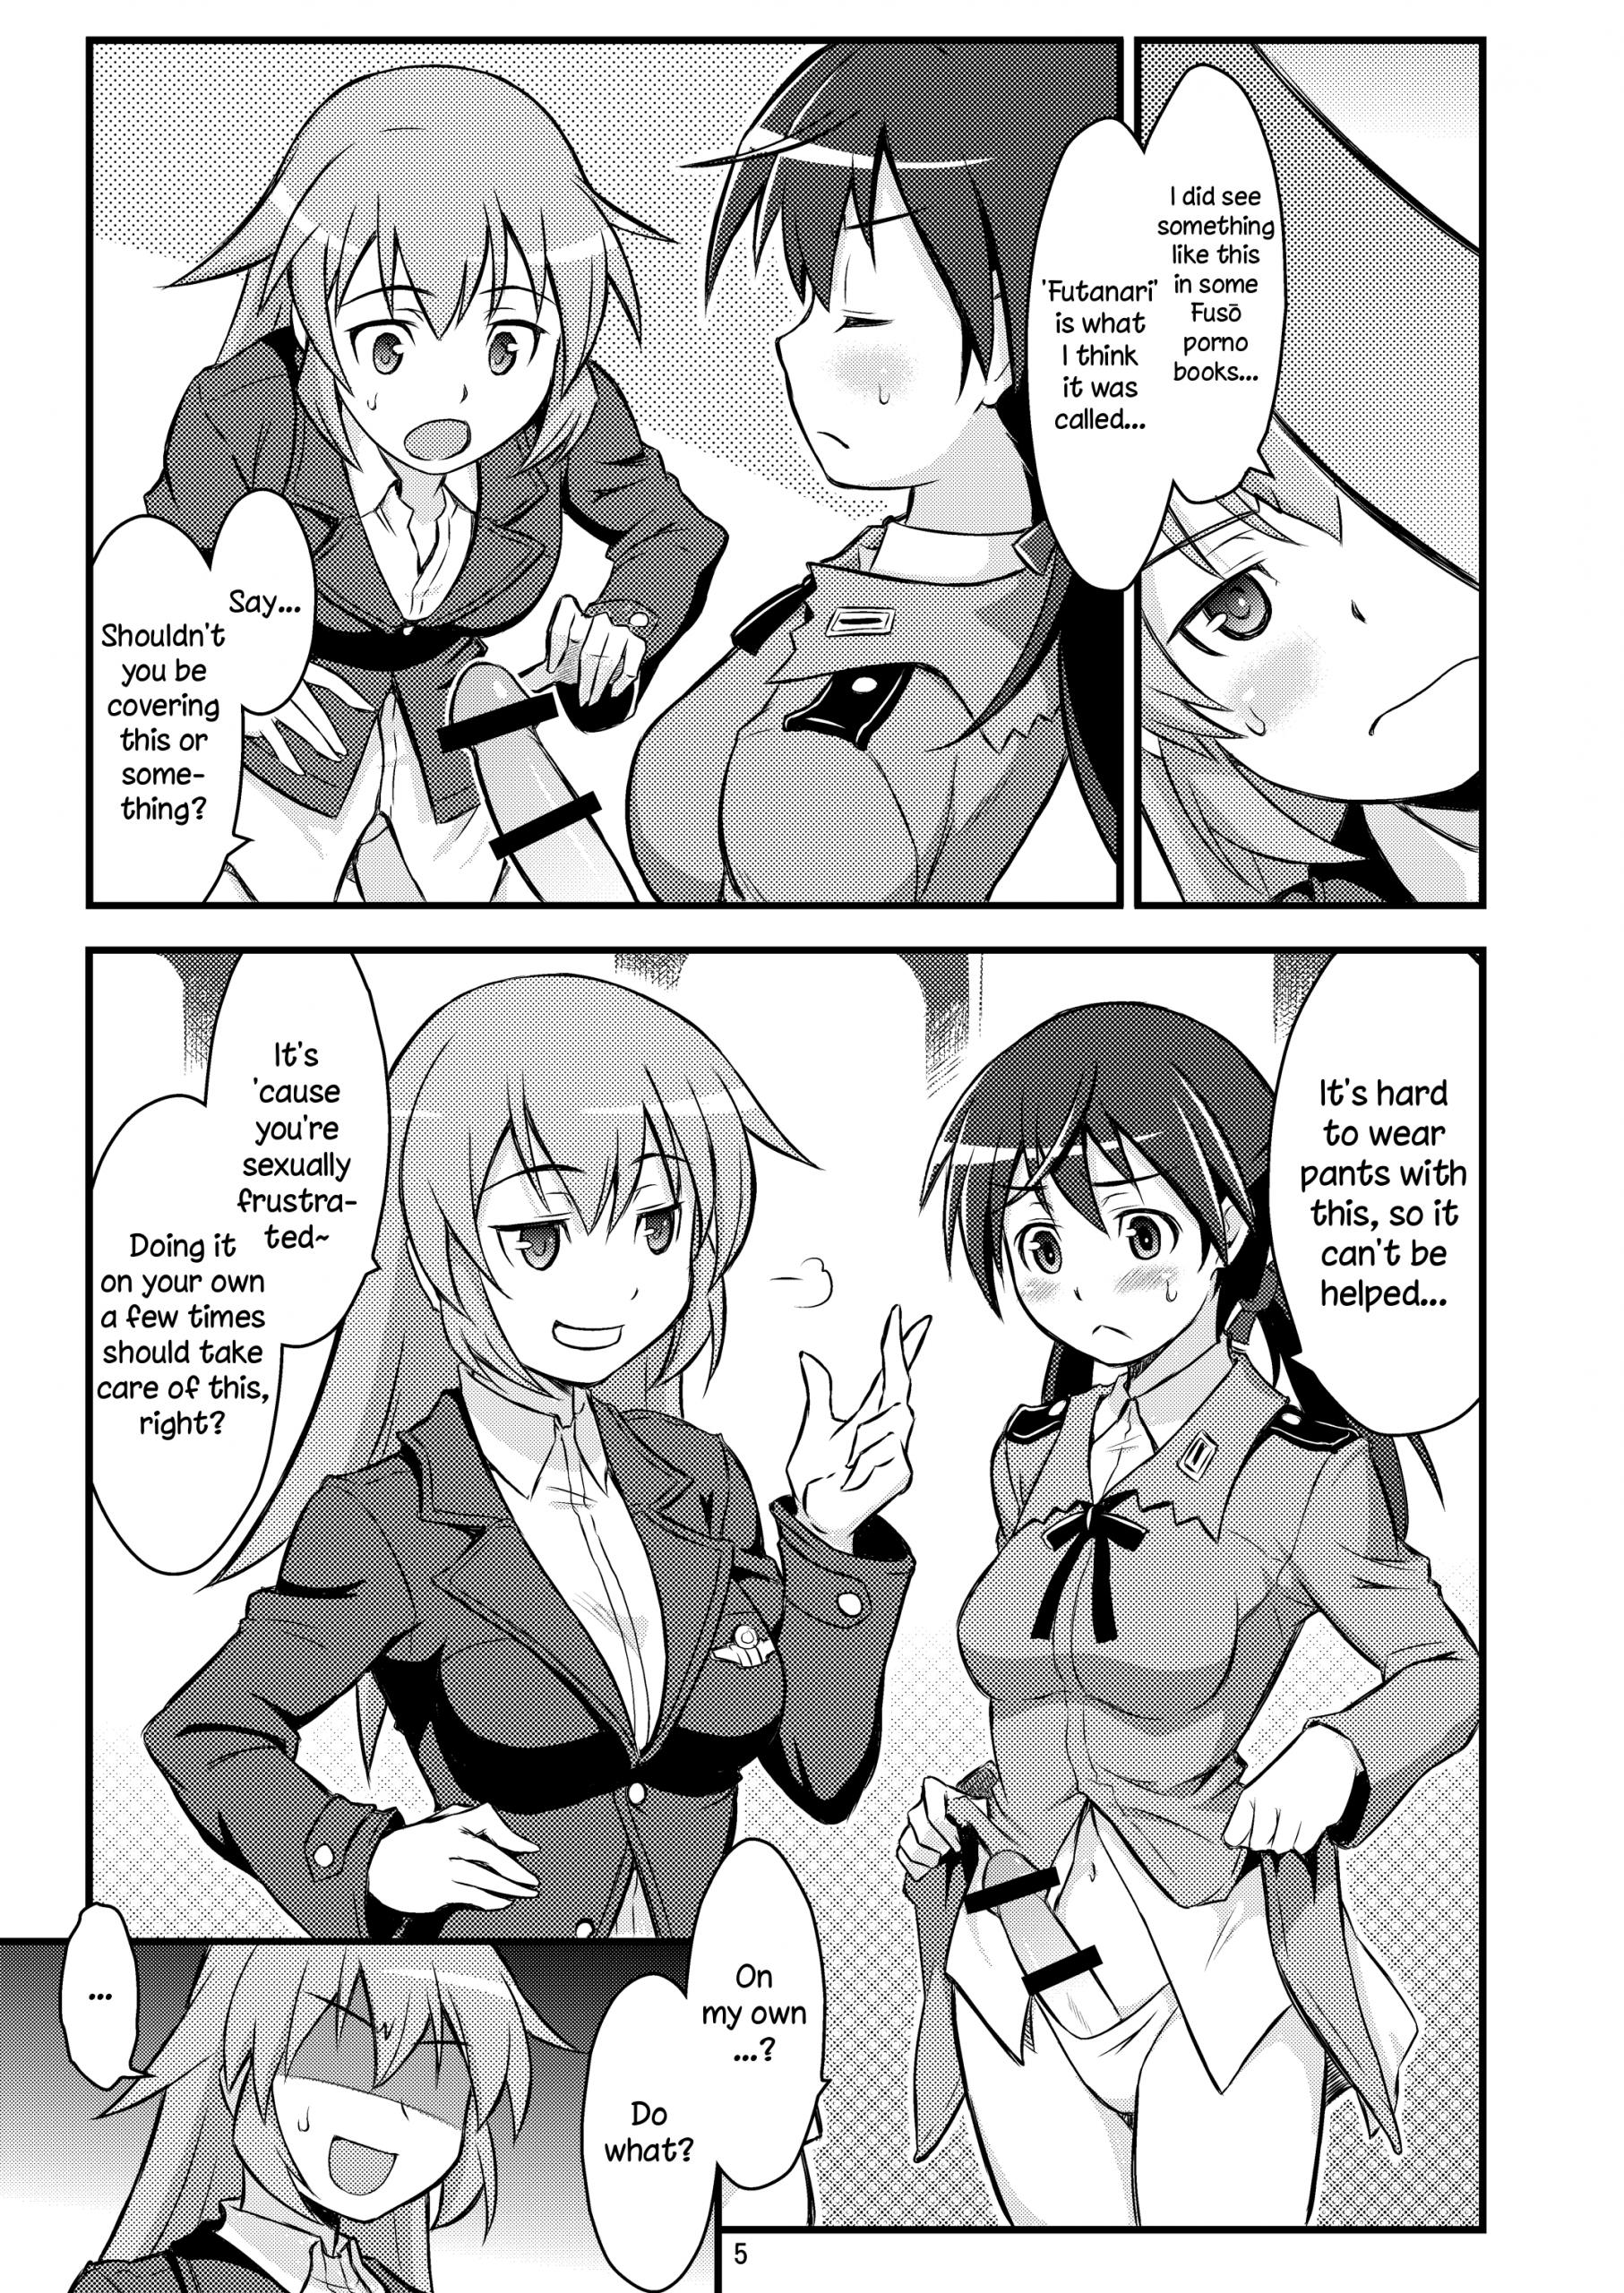 Shir and Gert in Big Trouble hentai manga picture 4